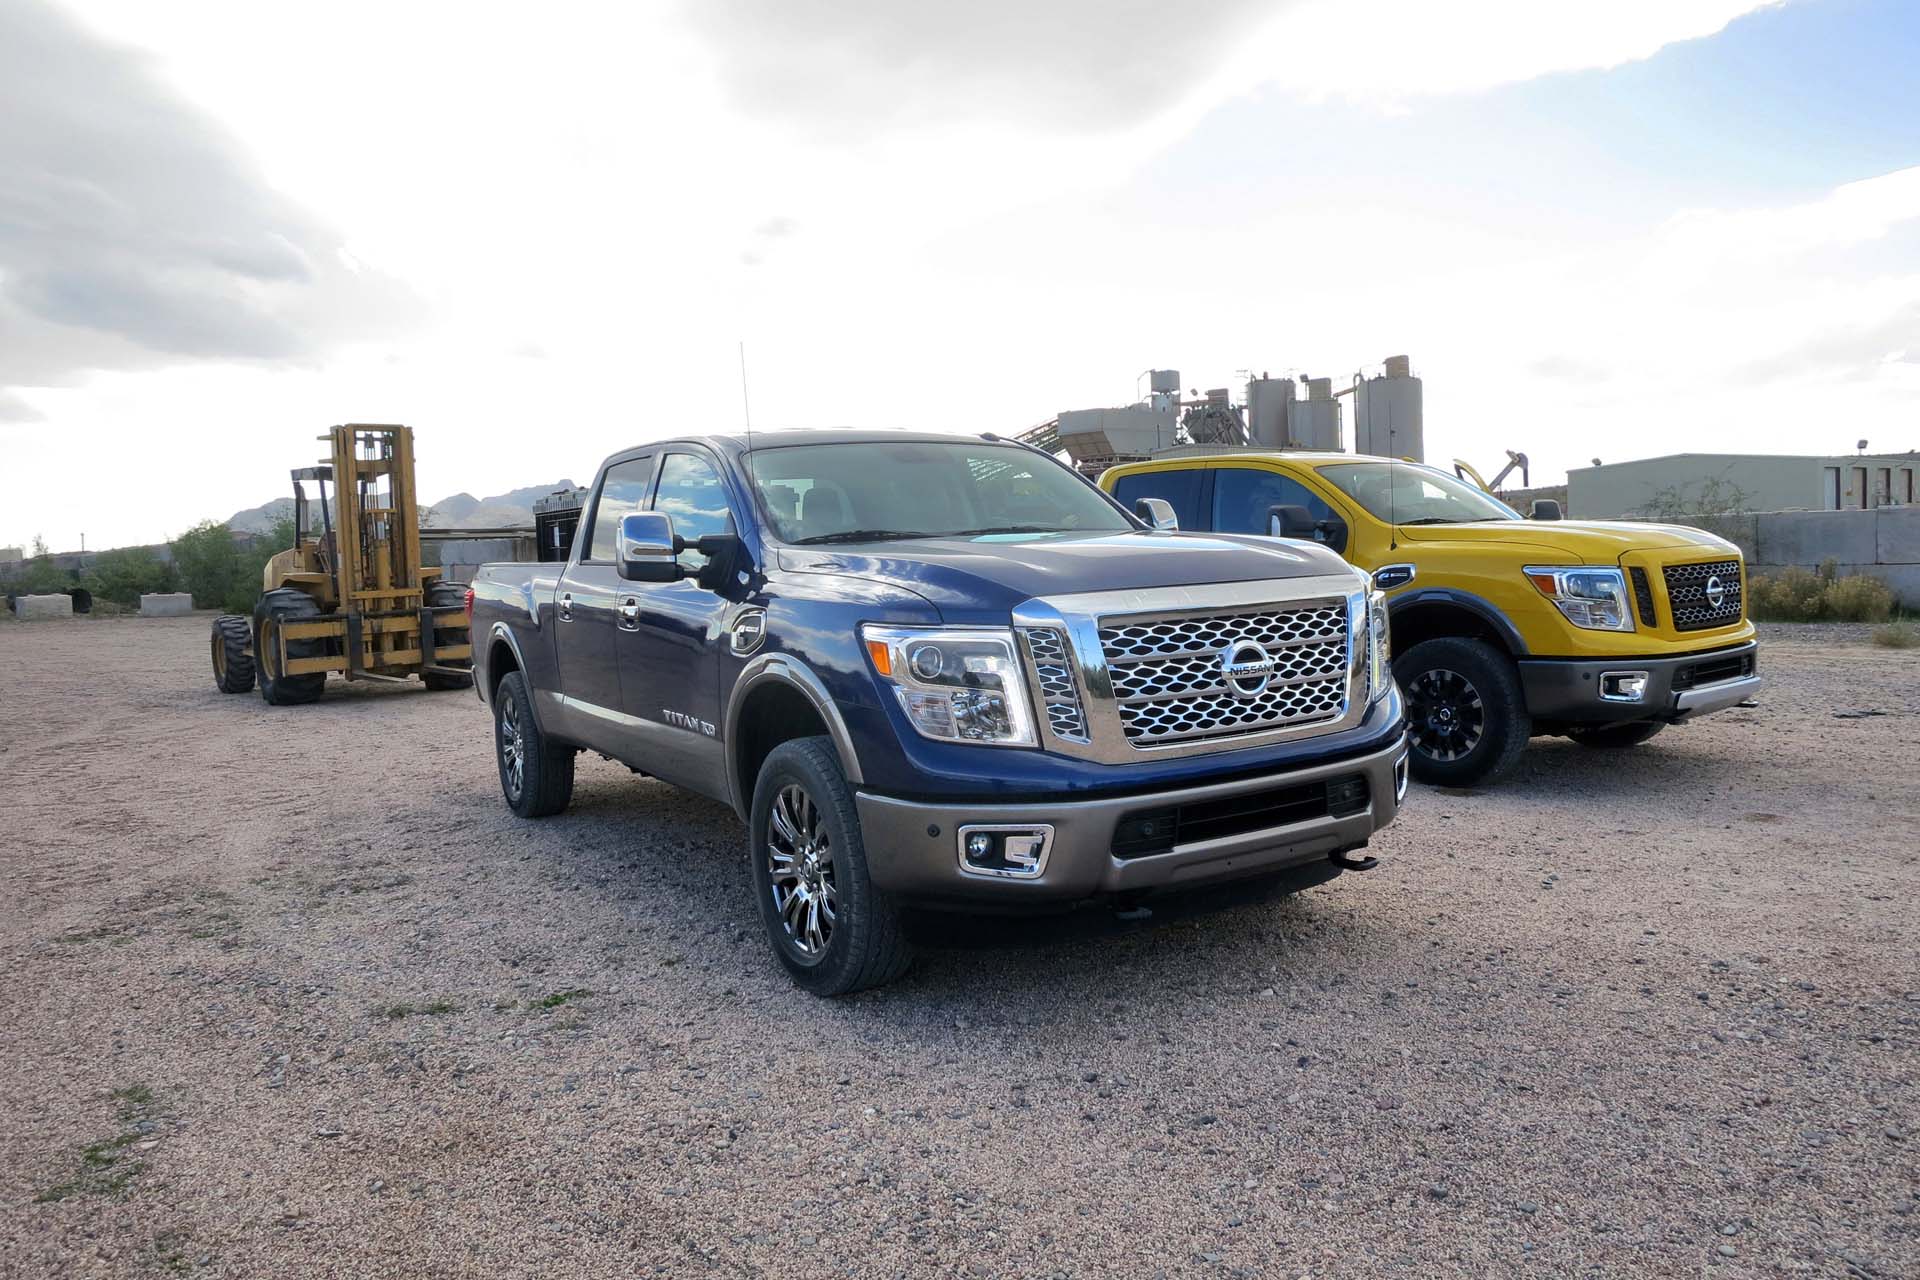 While Canadian pricing won't be available until the truck's 2016 arrival date is announced, the Titan XD is expected to start around US $40,000 for base crew cab 4x4, up to US $60,000 for a fully loaded Platinum Reserve. The regular gasoline version should arrive a few months after the Titan XD, with pricing competitive with domestic brands.